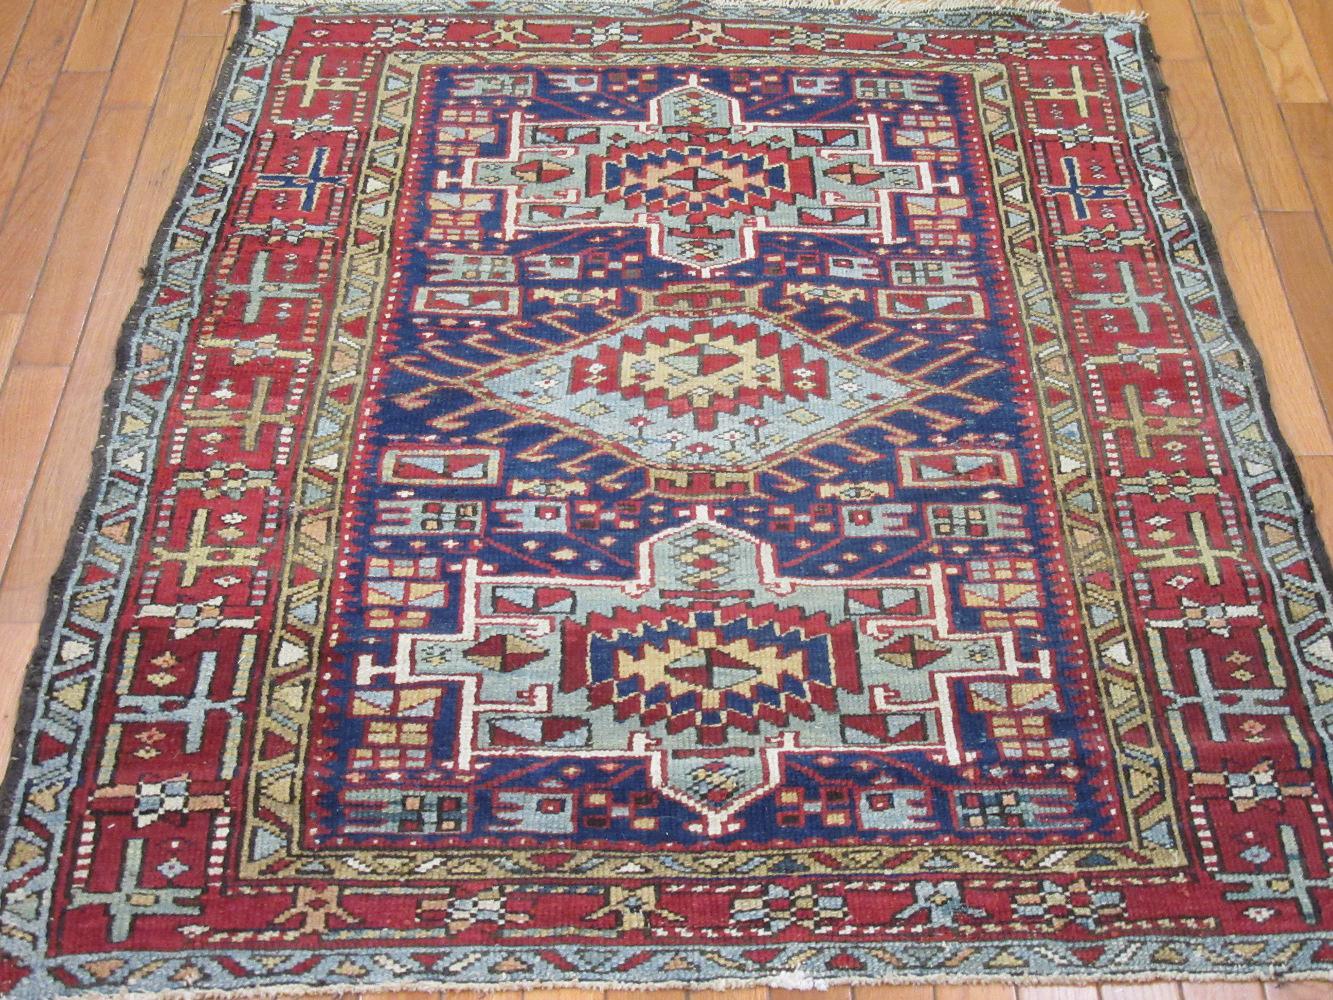 This is a small hand-knotted antique Persian Heriz rug. It is made with wool pile and cotton foundation and natural dyes in a geometric multi medallion design. It a perfect rug for any spot in your house or office. It measures
Measures: 3'5